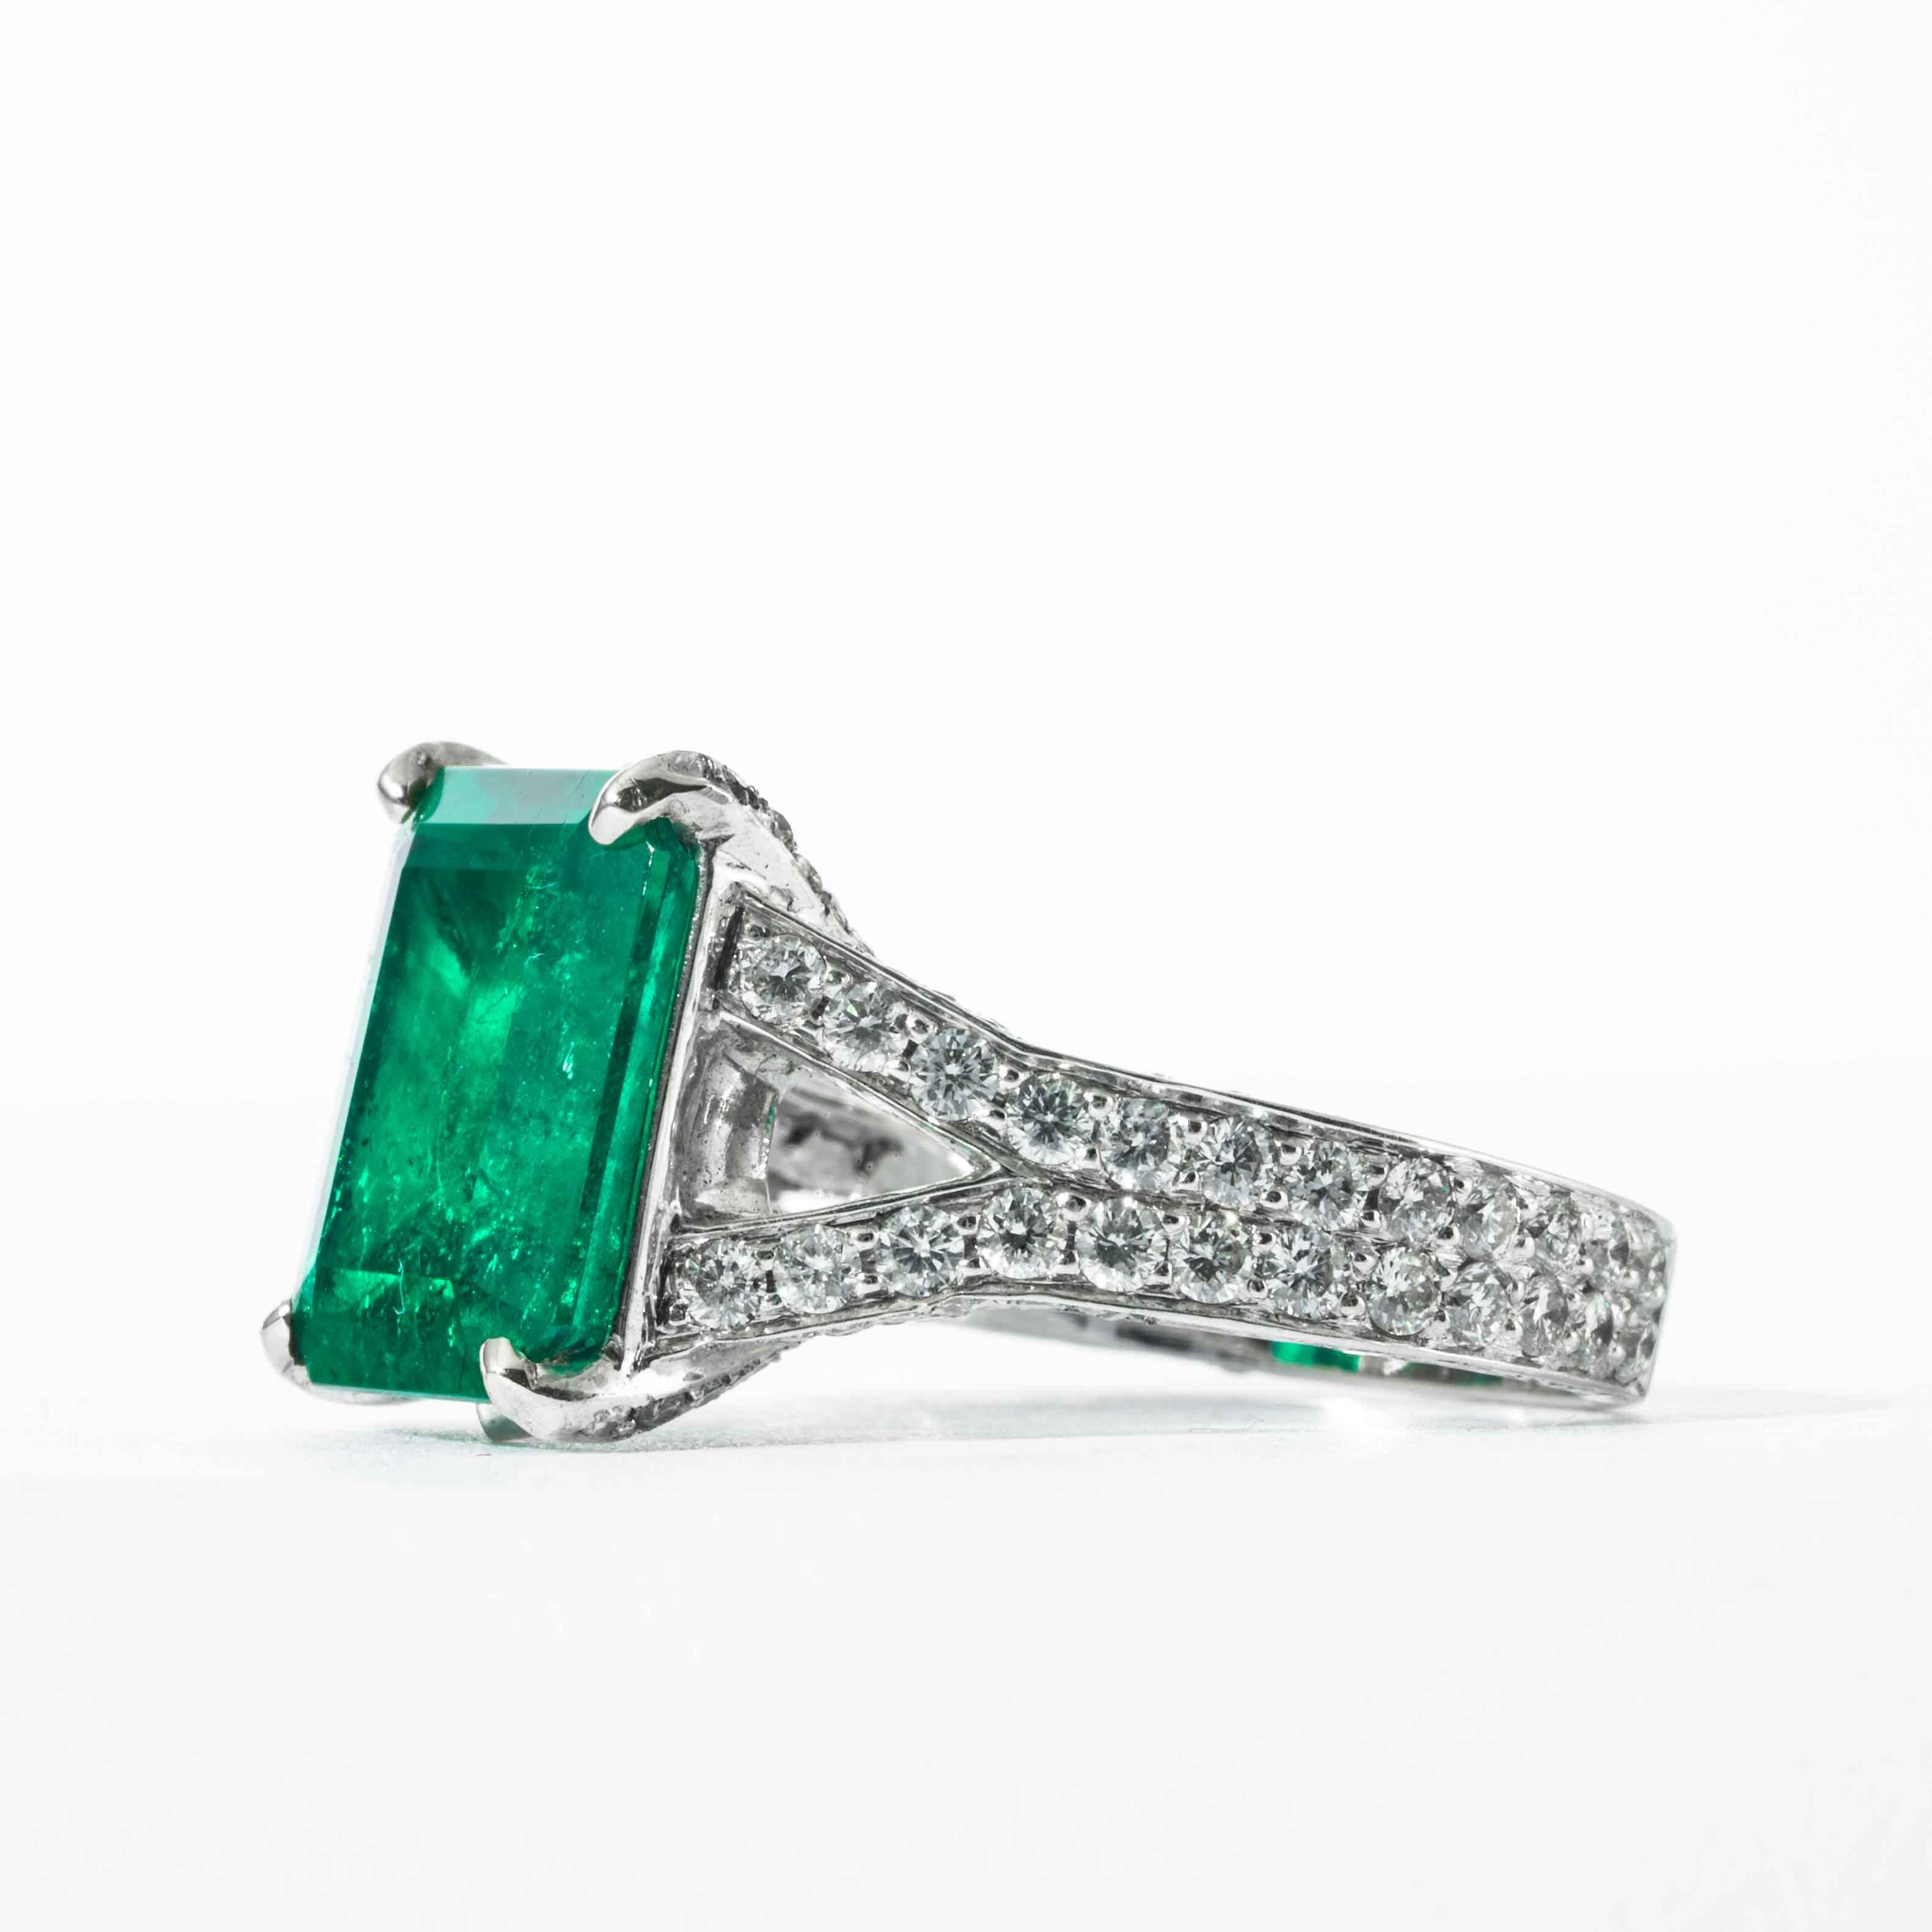 Shreve, Crump & Low 6.25 Carat Colombian Emerald and Diamond White Gold Ring In New Condition For Sale In Boston, MA